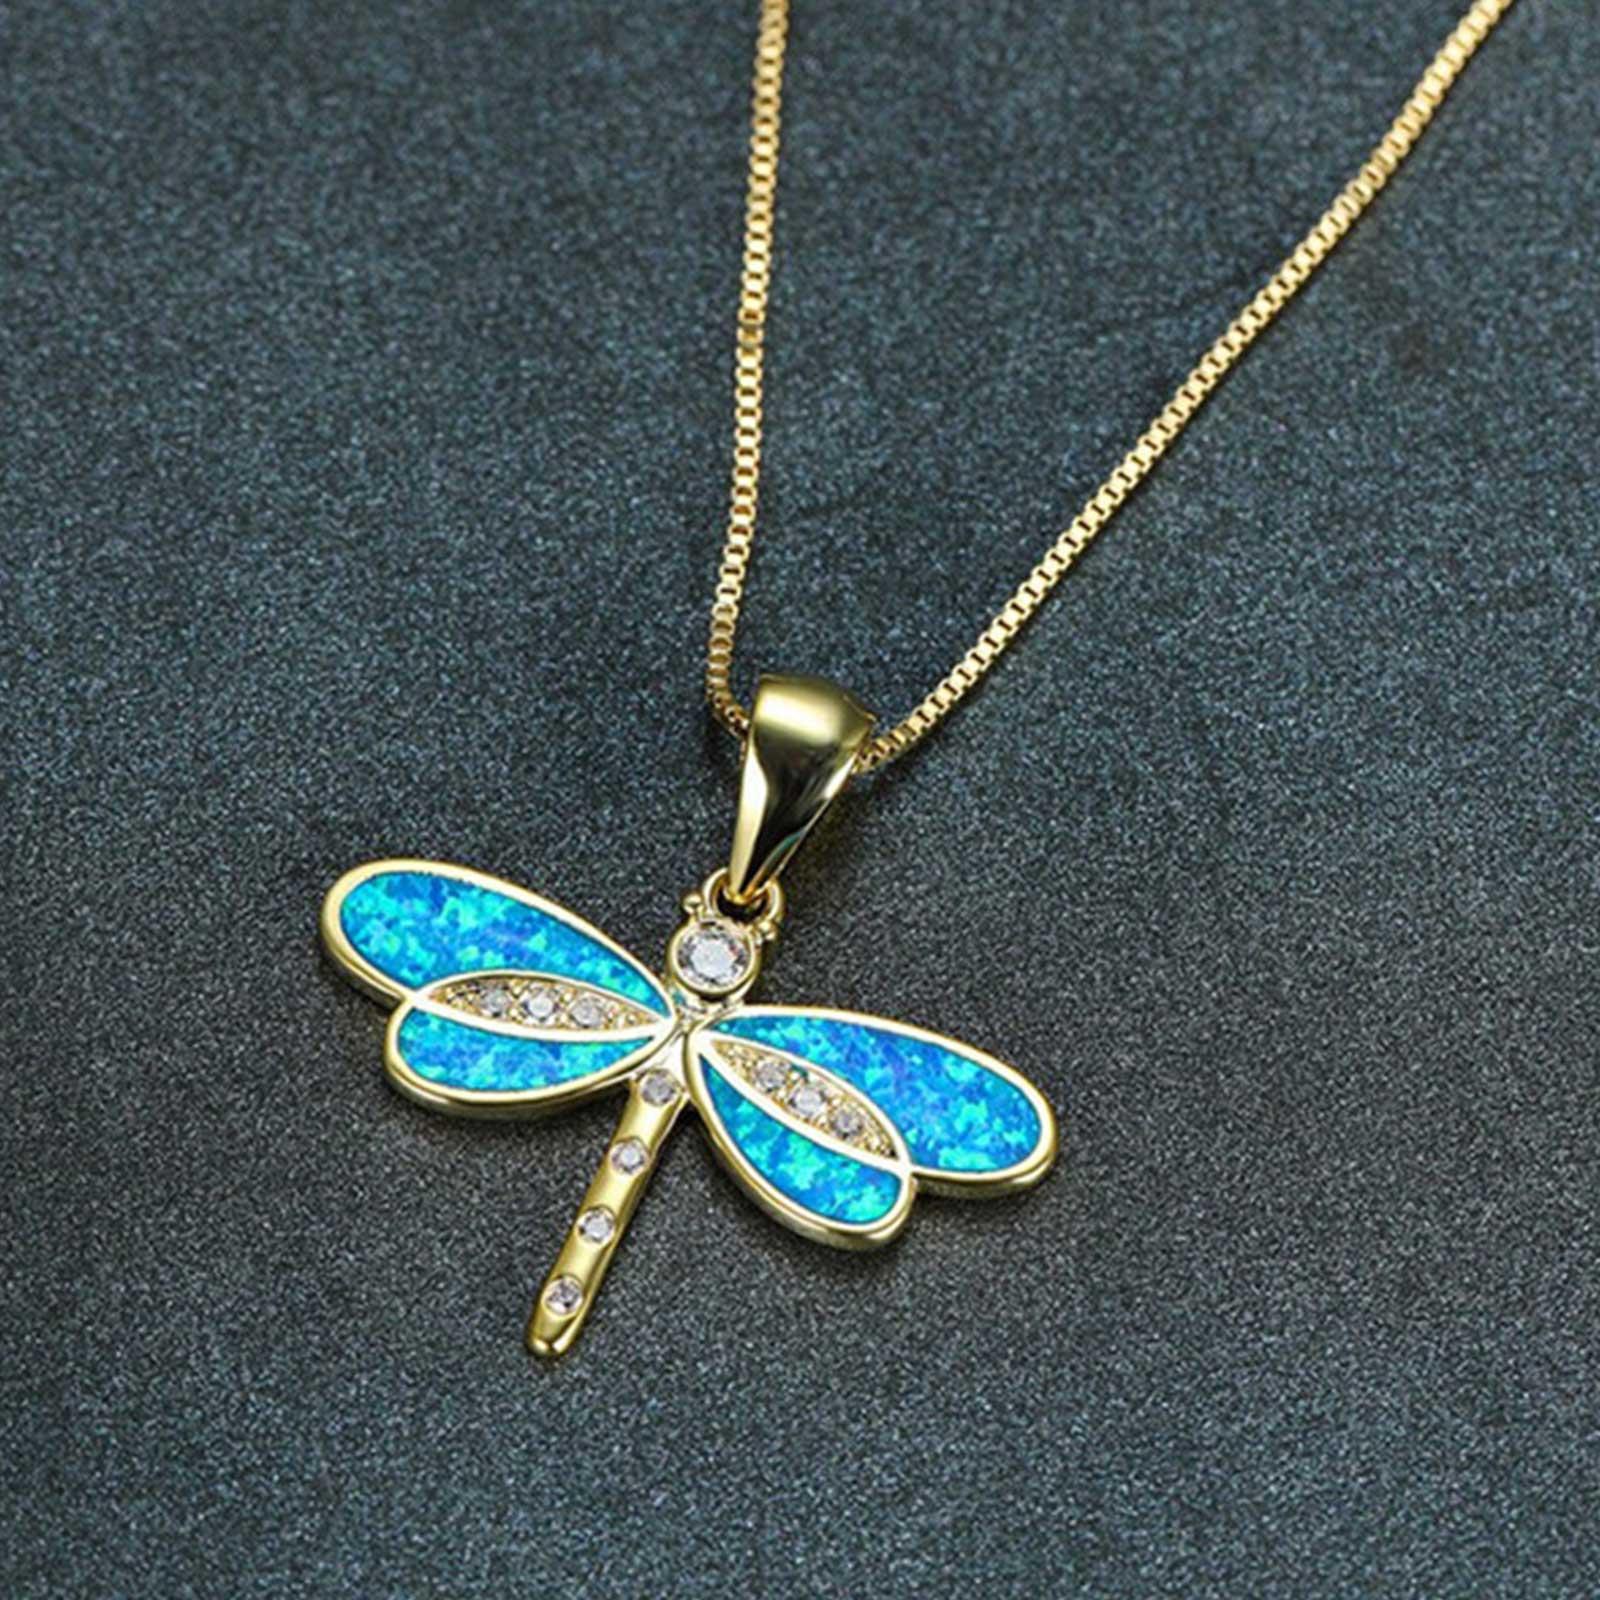 Dragonfly Necklace Pendant Choker For Women Girls Gold Silver White Blue Opal Z0T2 - image 4 of 9